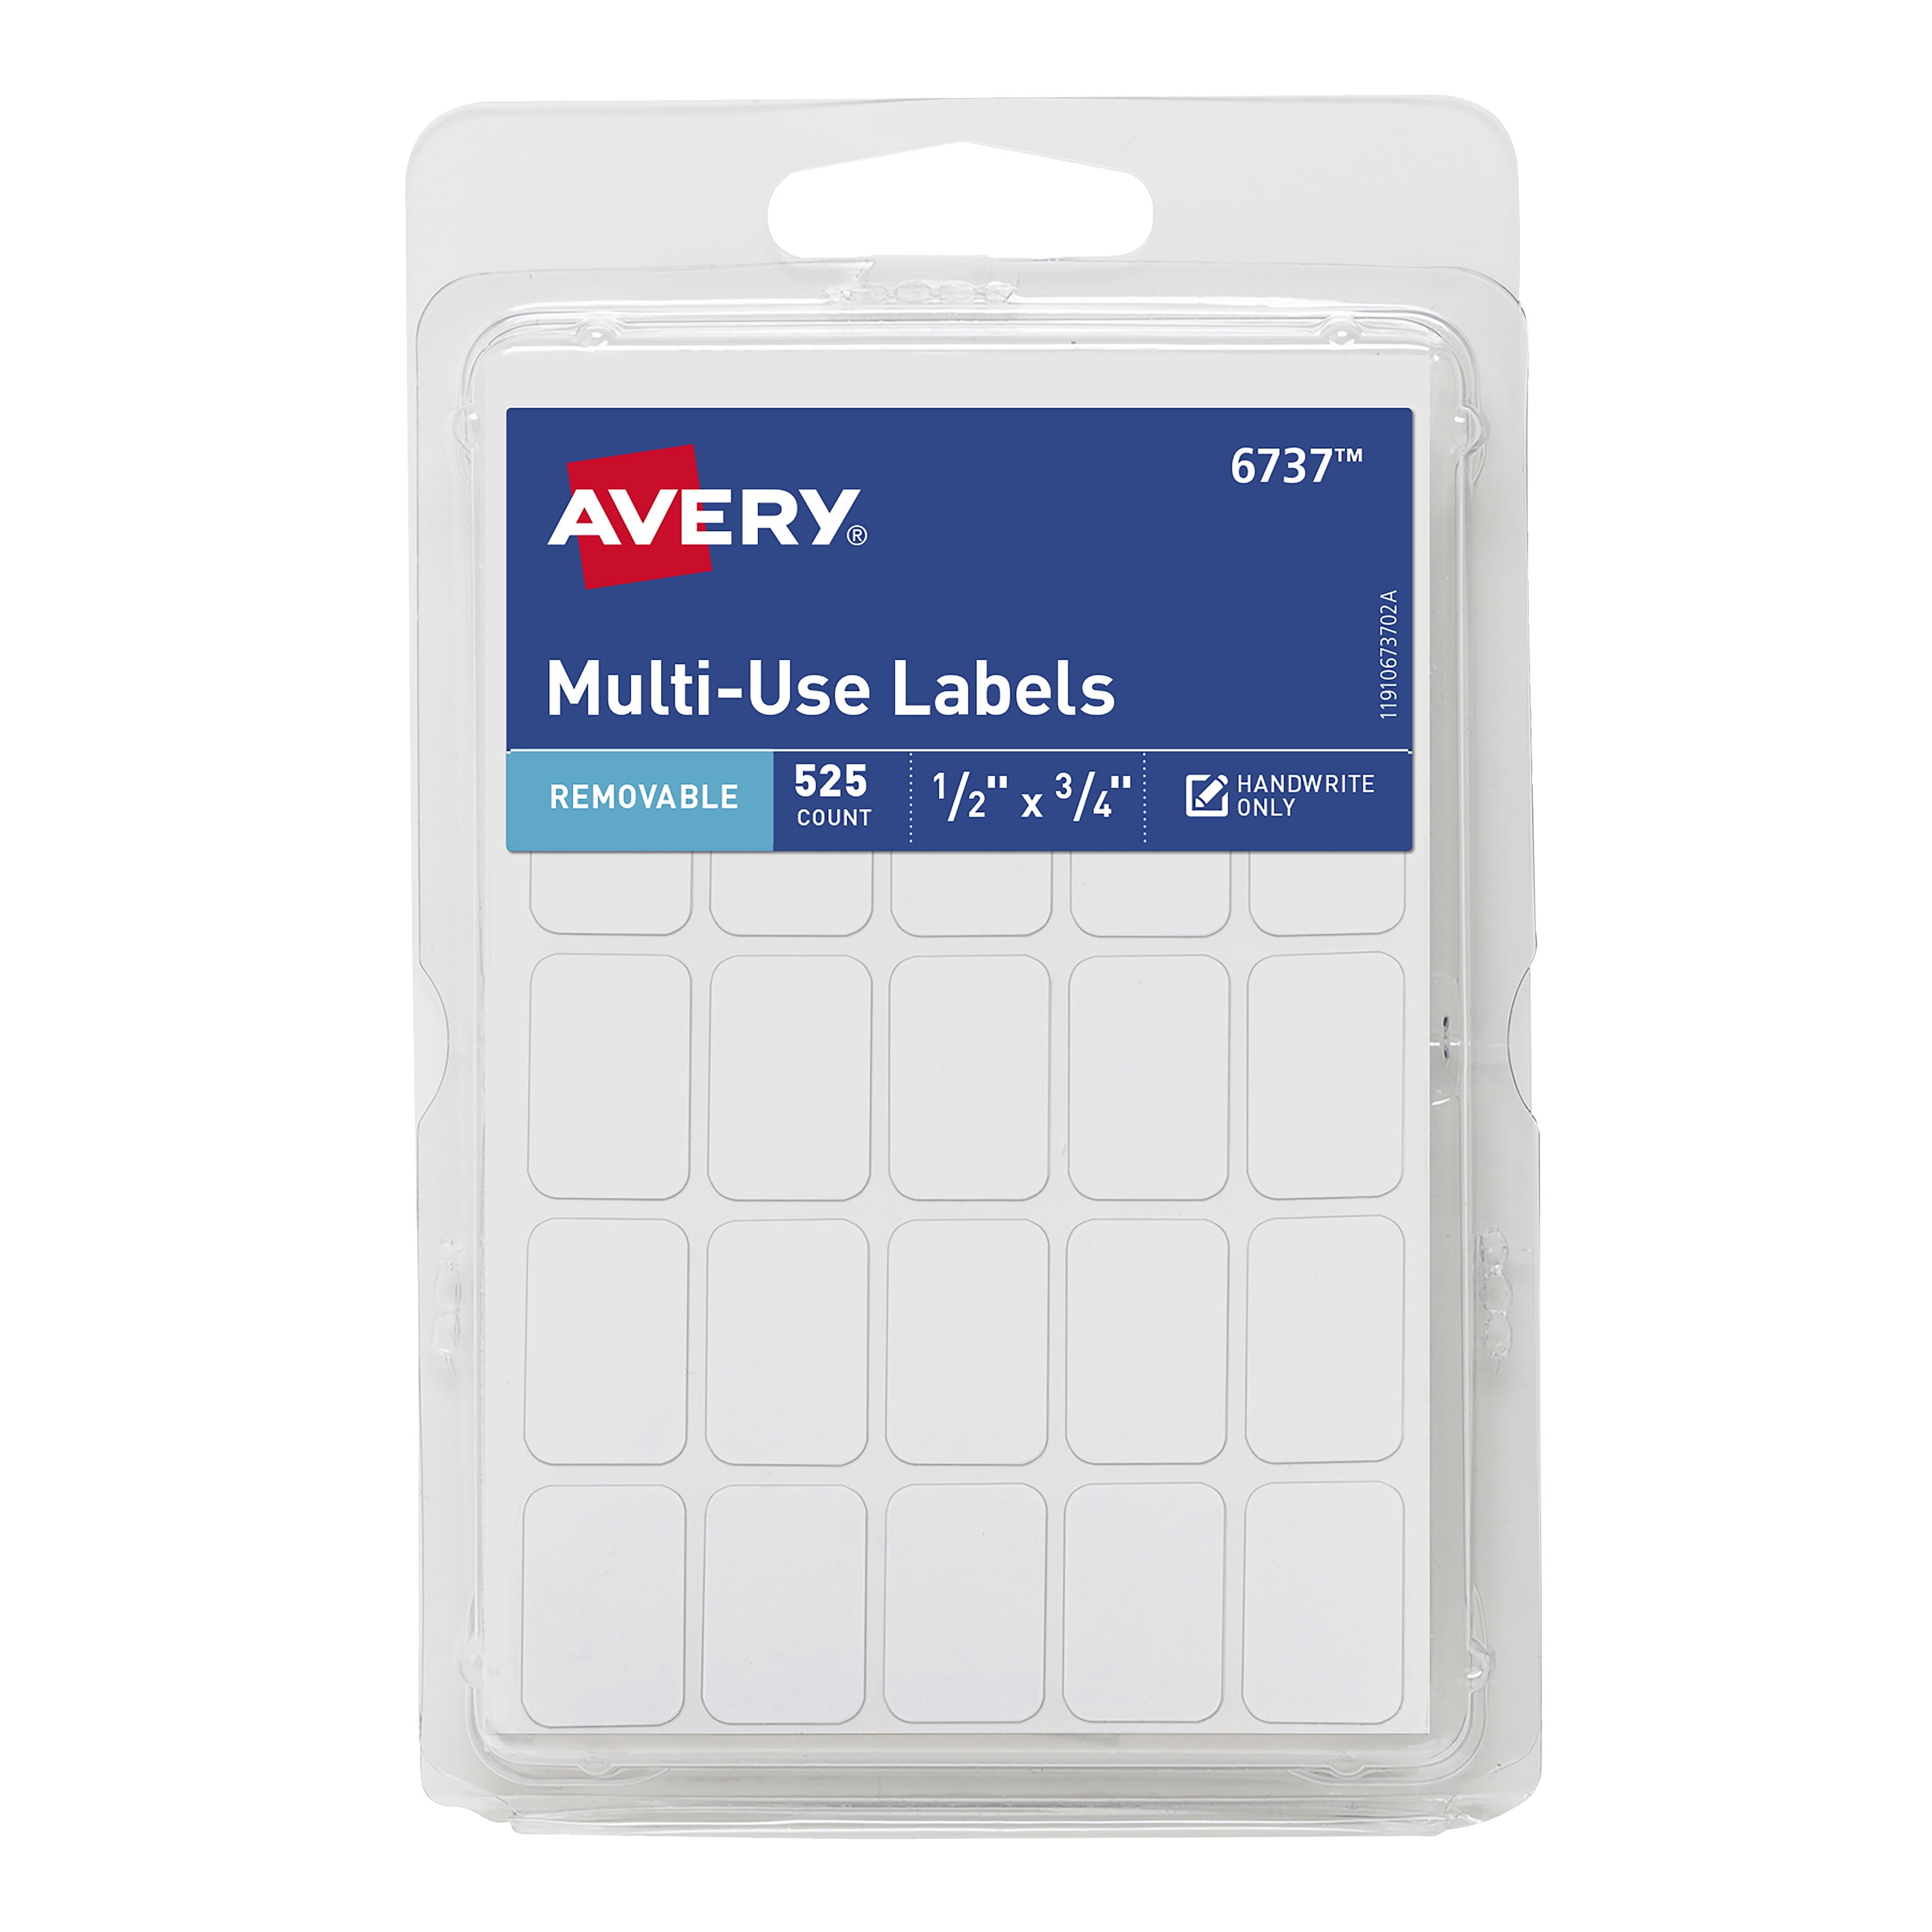 Avery Multi-Use Labels, White, 1/2" x 3/4", Removable, Handwrite, 525 Labels (16737)